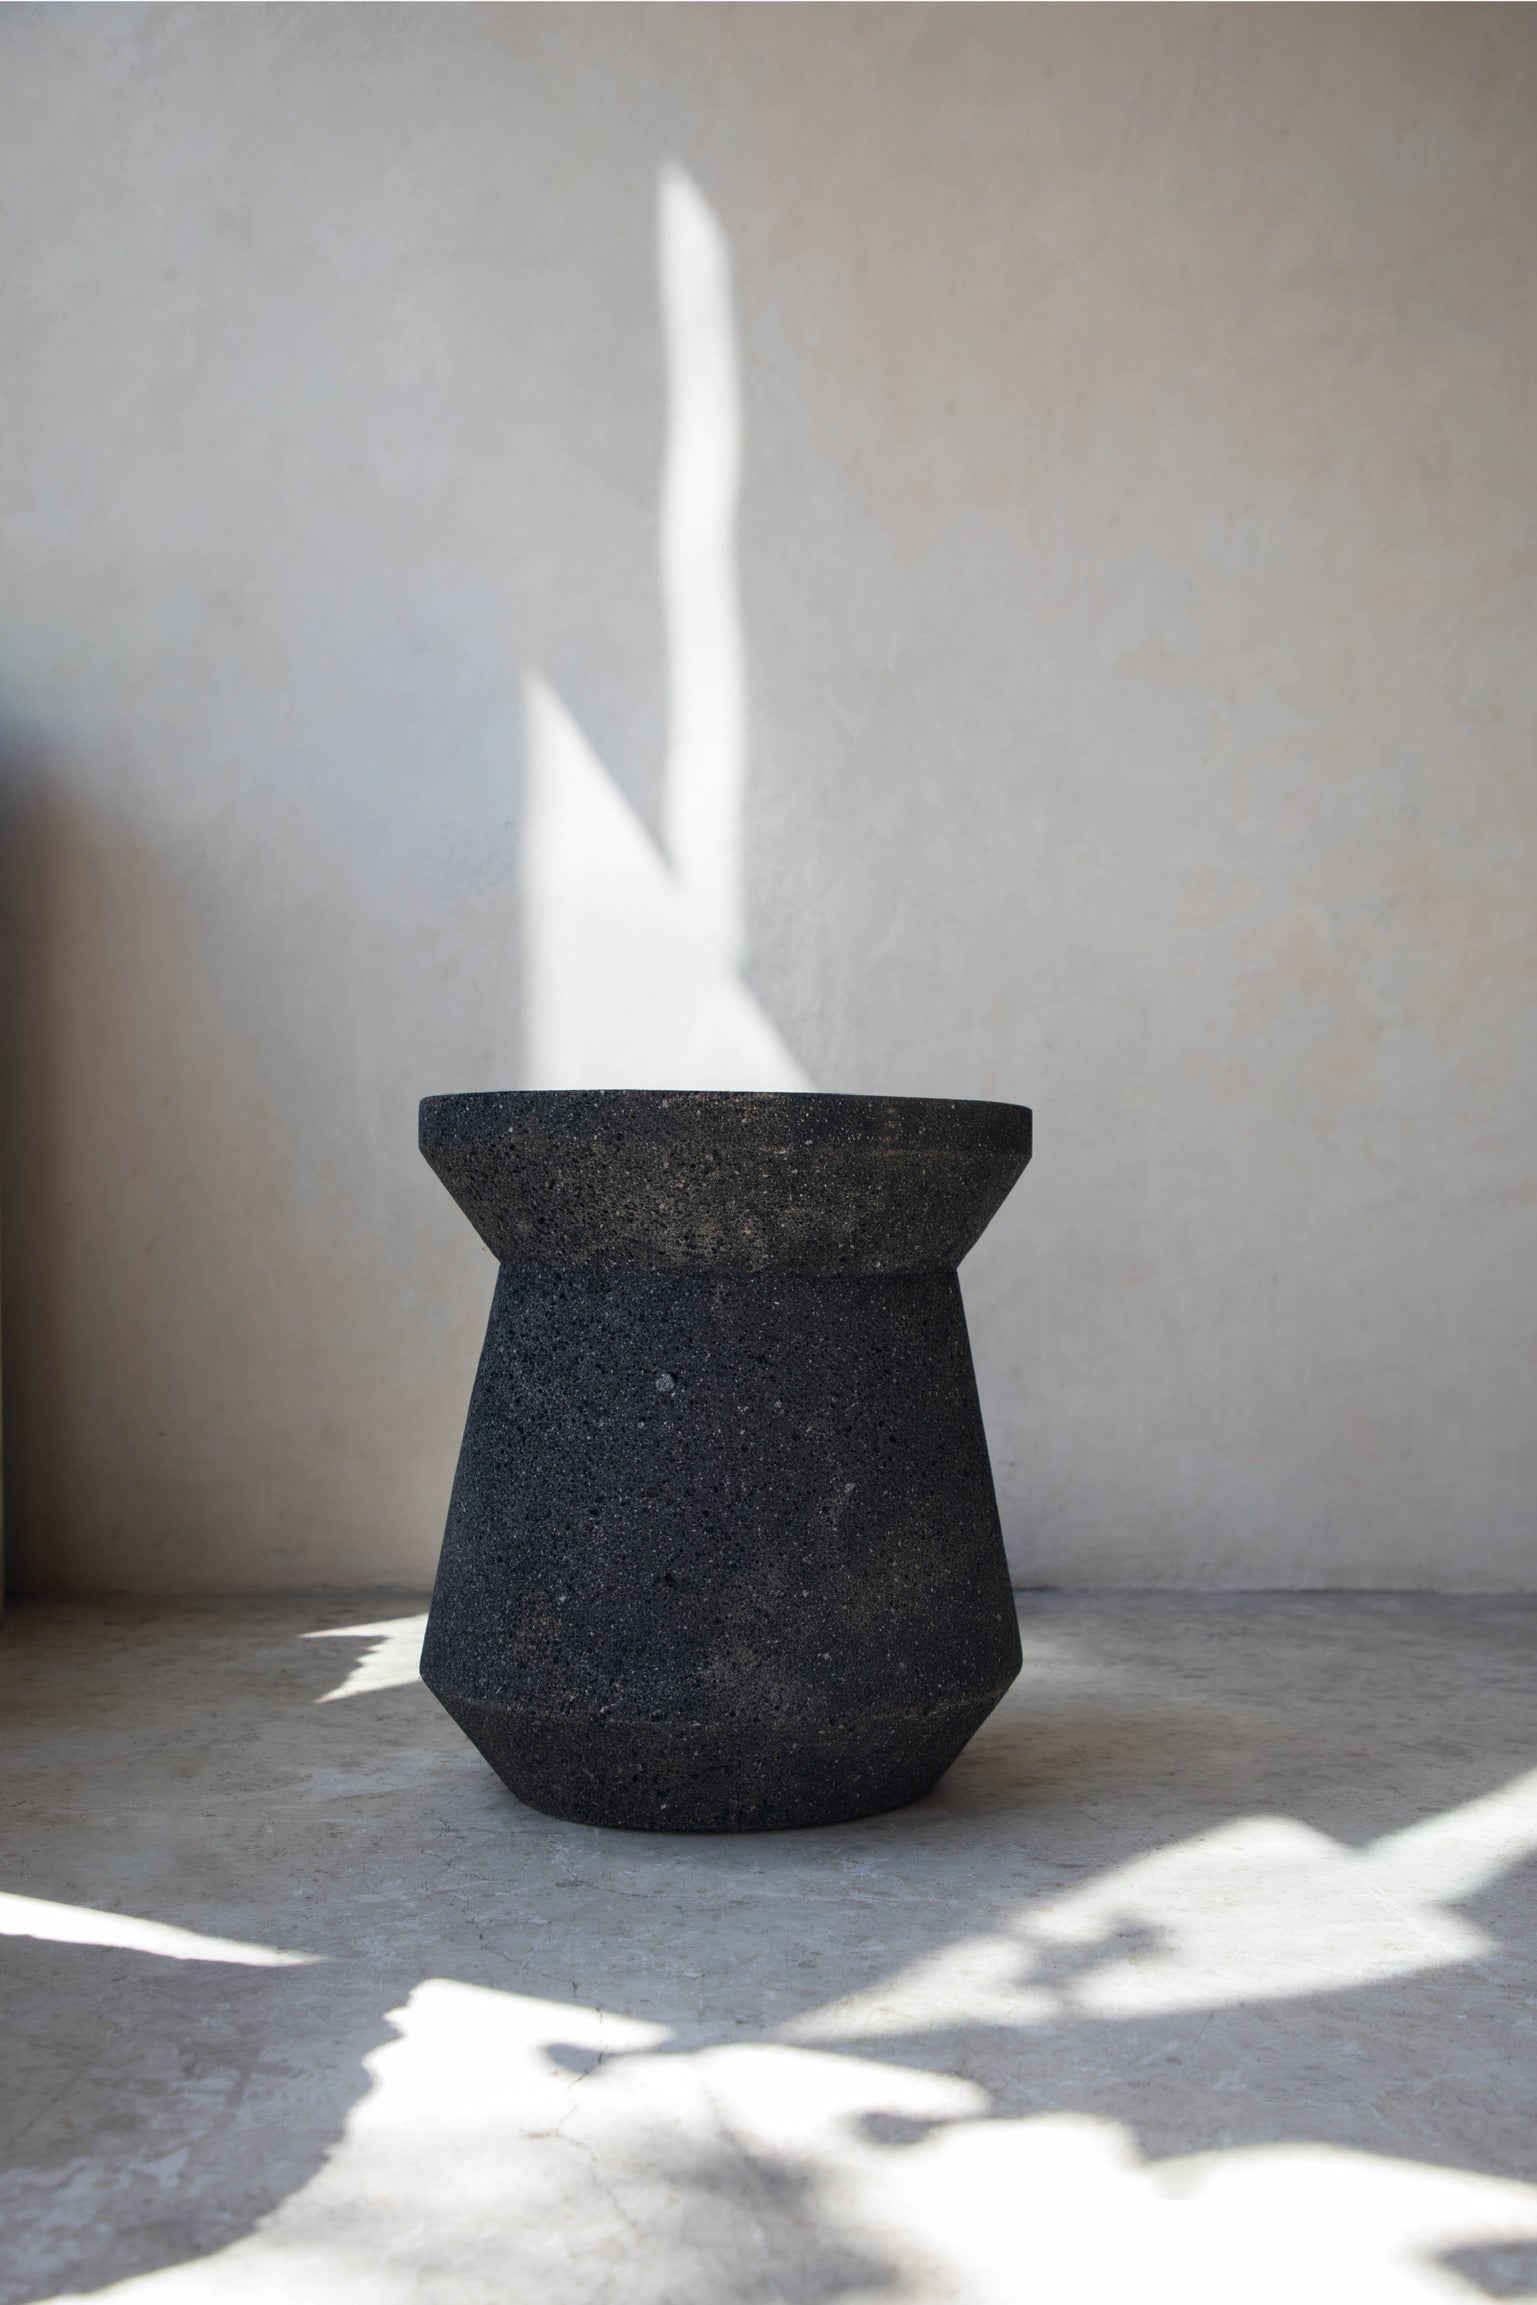 Stone totem 03 by Daniel Orozco
Material: Volcanic rock.
Dimensions: D 35 x H 45 cm

Volvanic rock Totem.

Daniel Orozco Estudio
We are an inclusive interior design estudio, who love to work with fabrics and natural textiles in makes our spaces